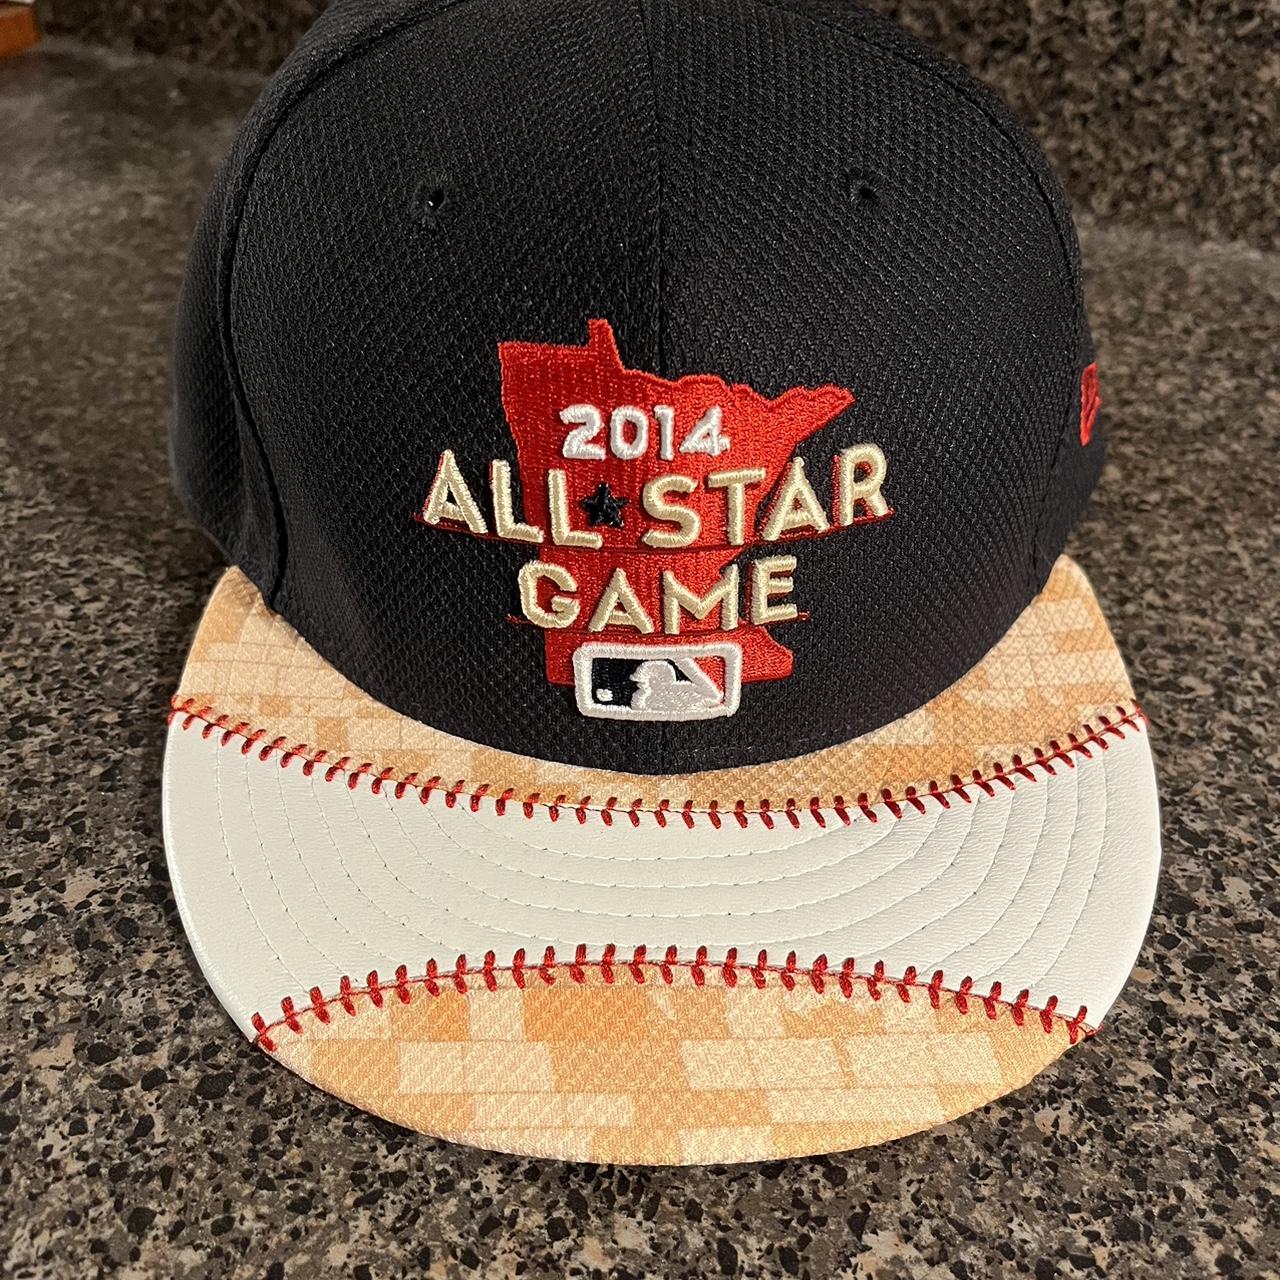 The Good, The Bad, And The Meh Of 2014 MLB All-Star Hats